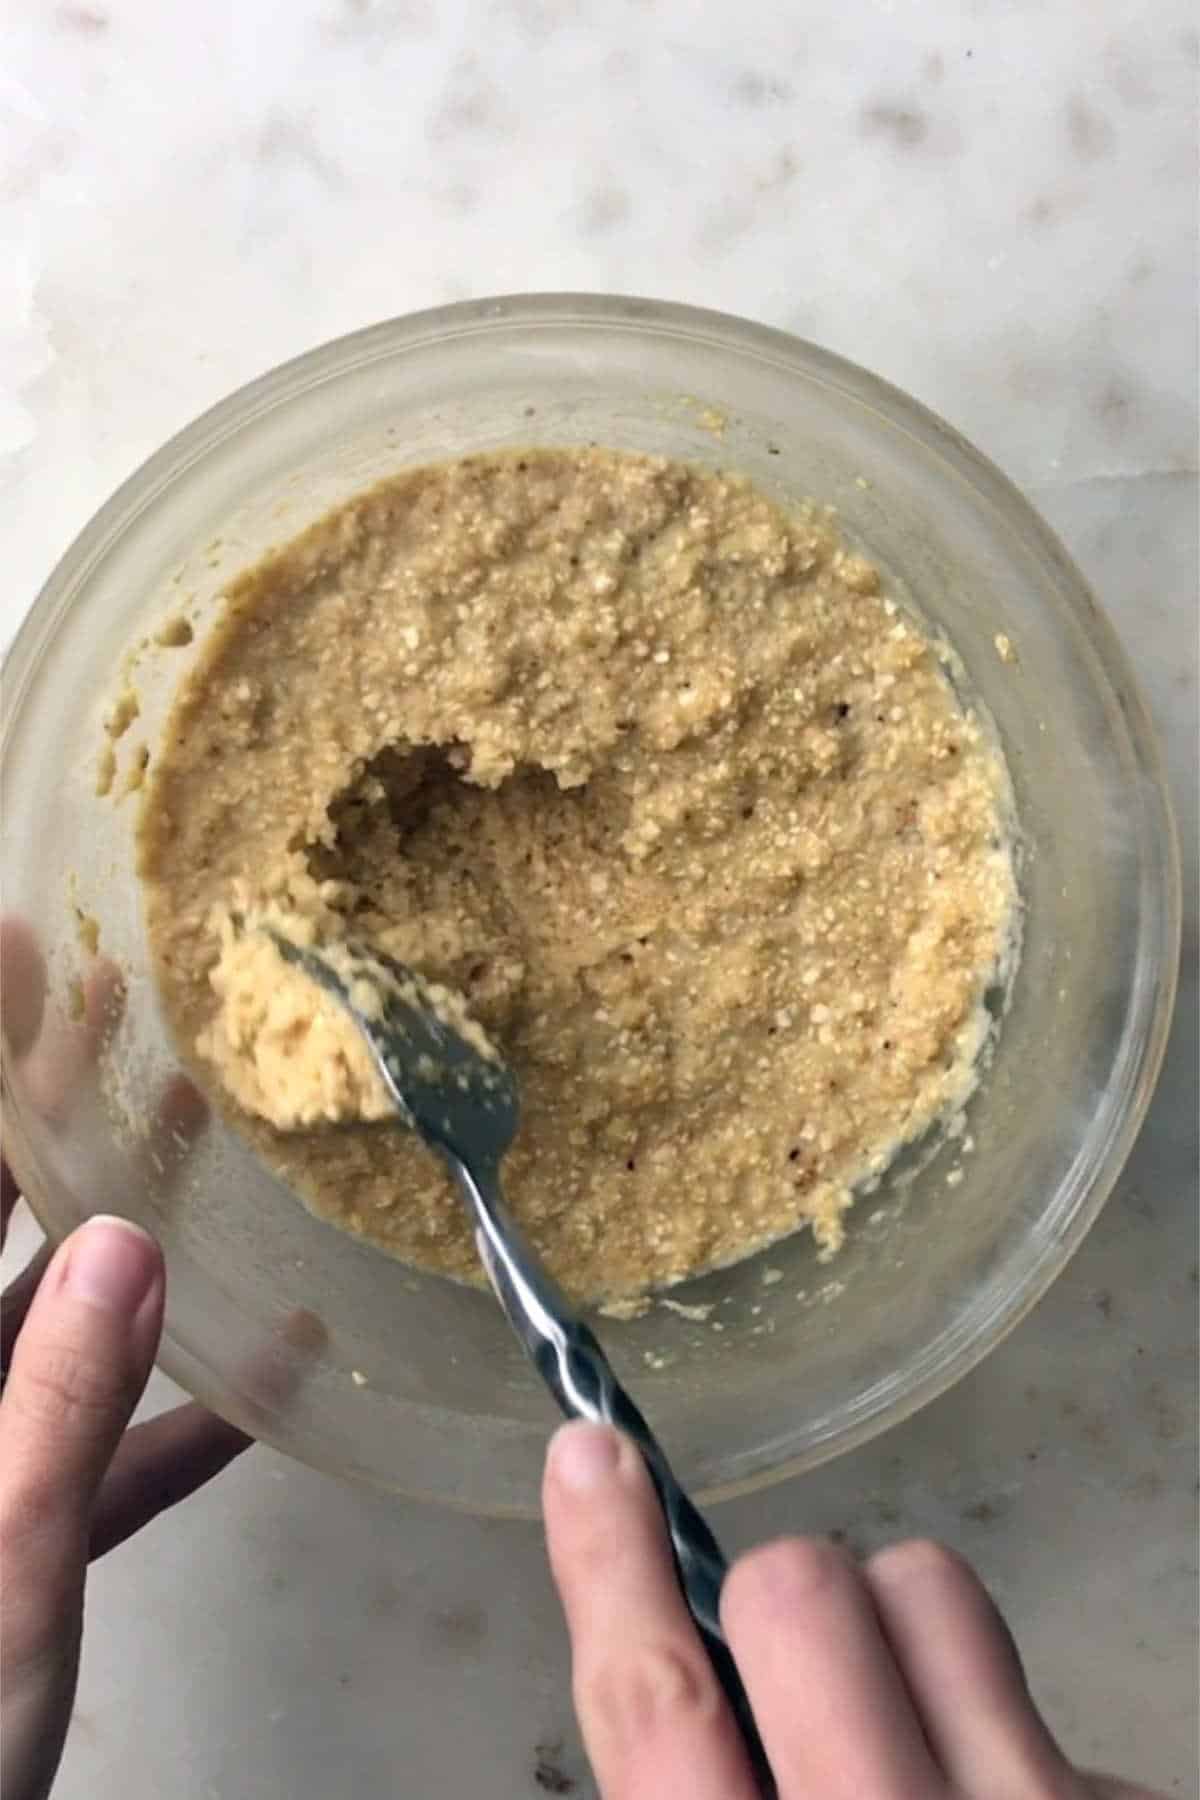 Beige mixture with a fork.